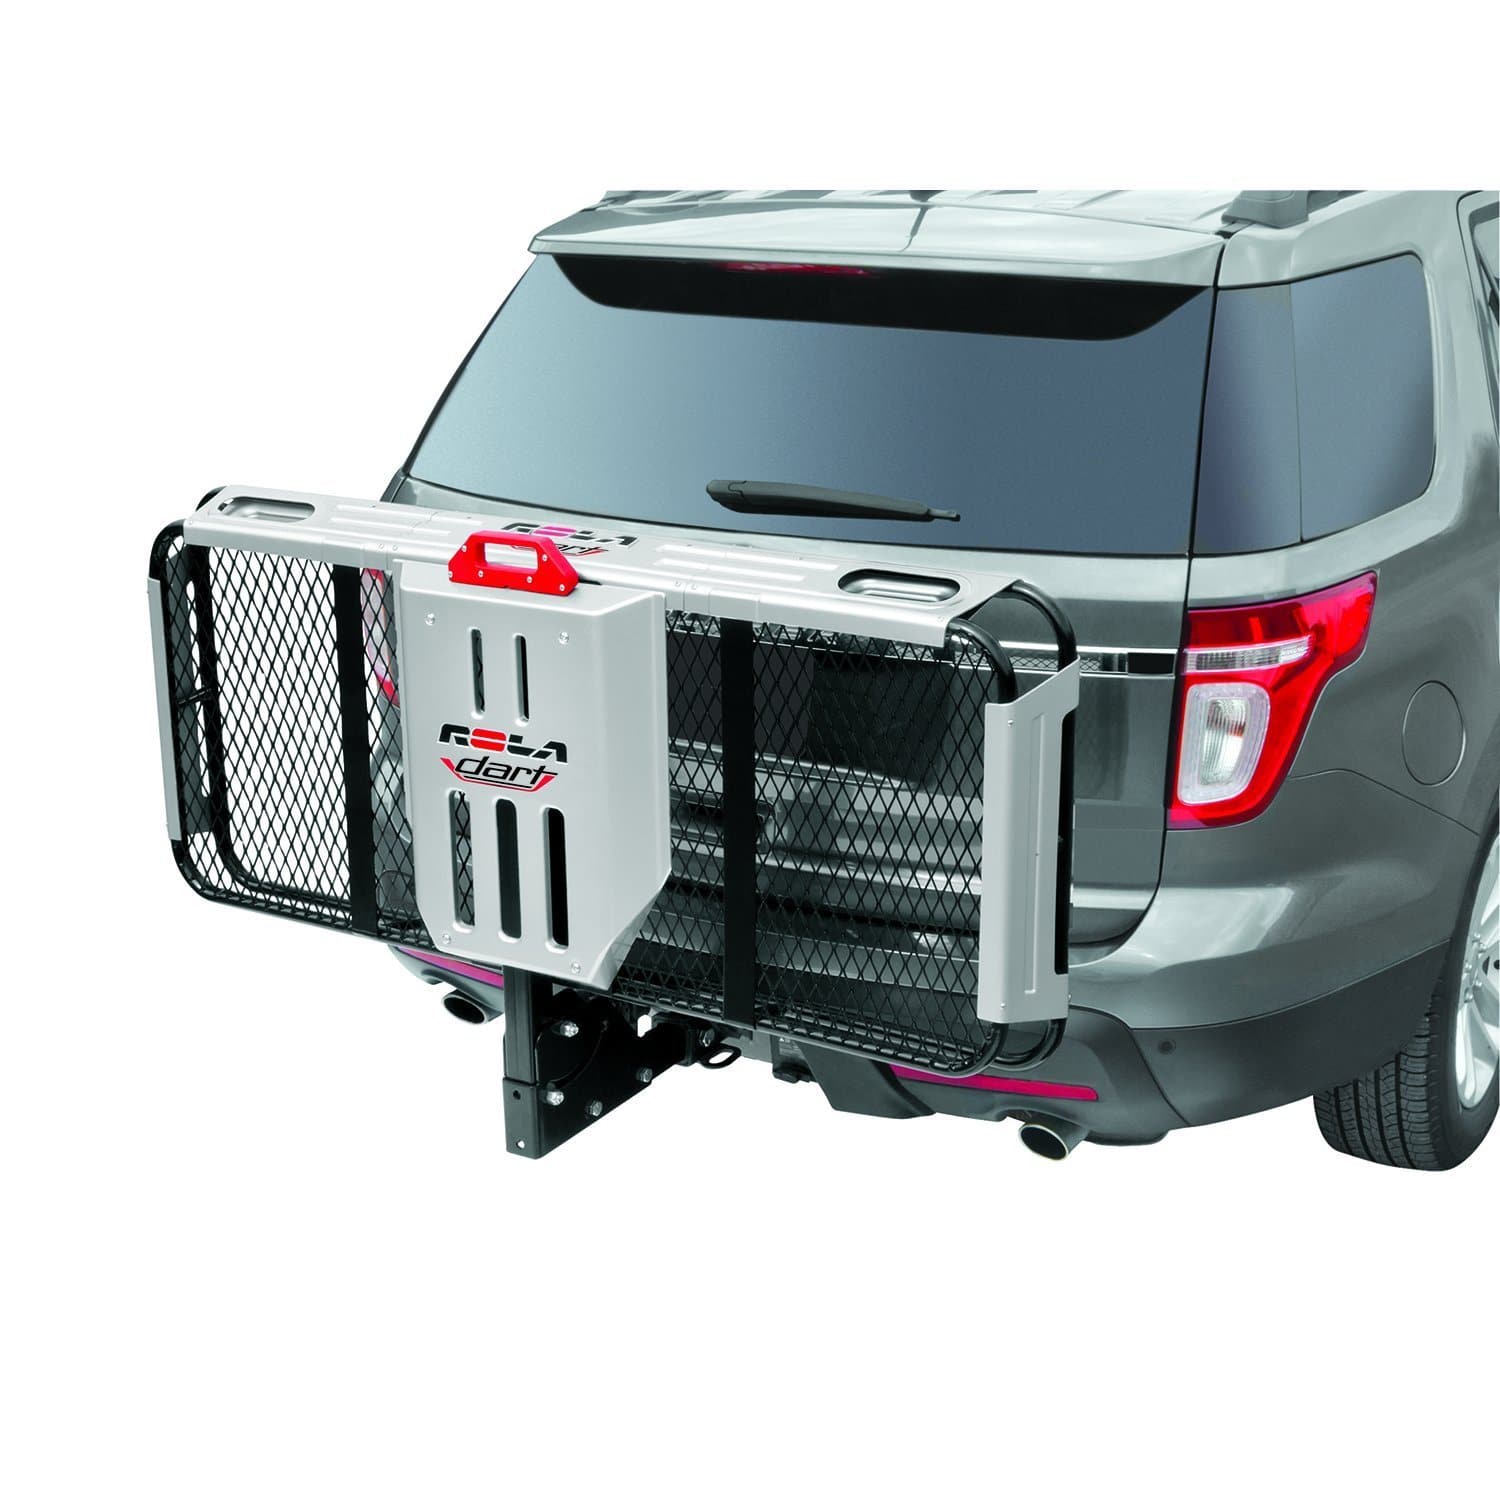 Top 15 Best Hitch Cargo Carrier (Review & Guide) 2021 What Is The Best Hitch Cargo Carrier